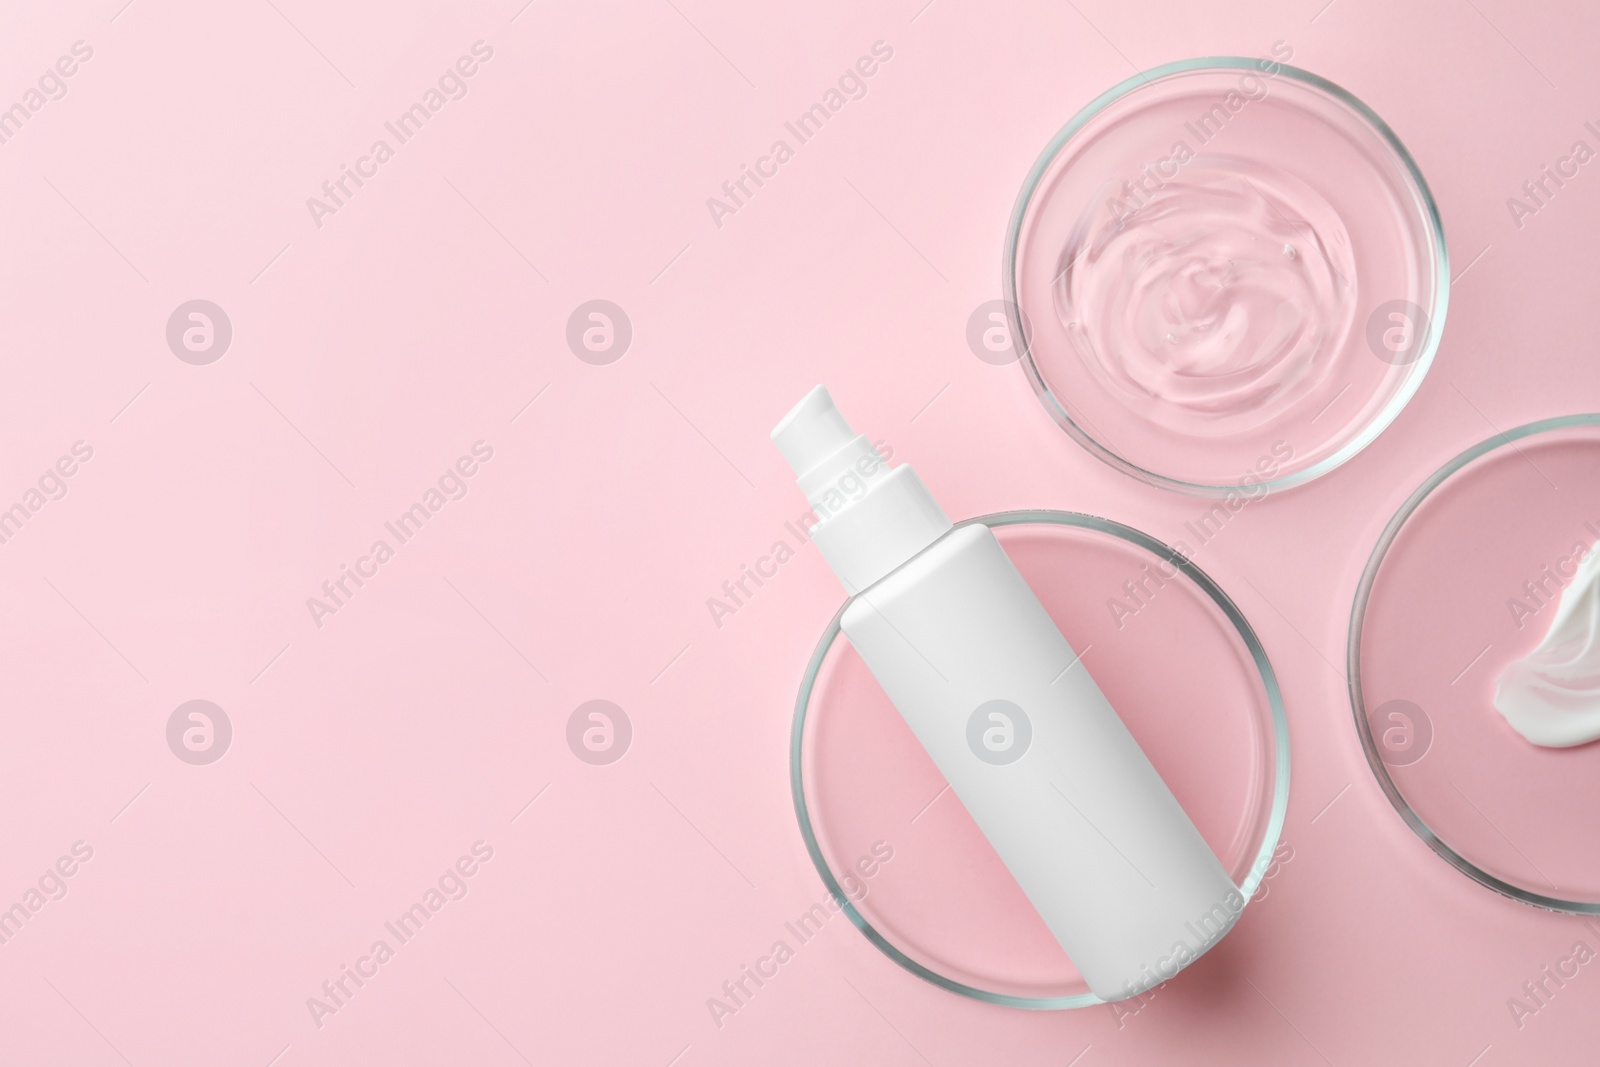 Photo of Petri dishes and cosmetic products on pink background, flat lay. Space for text